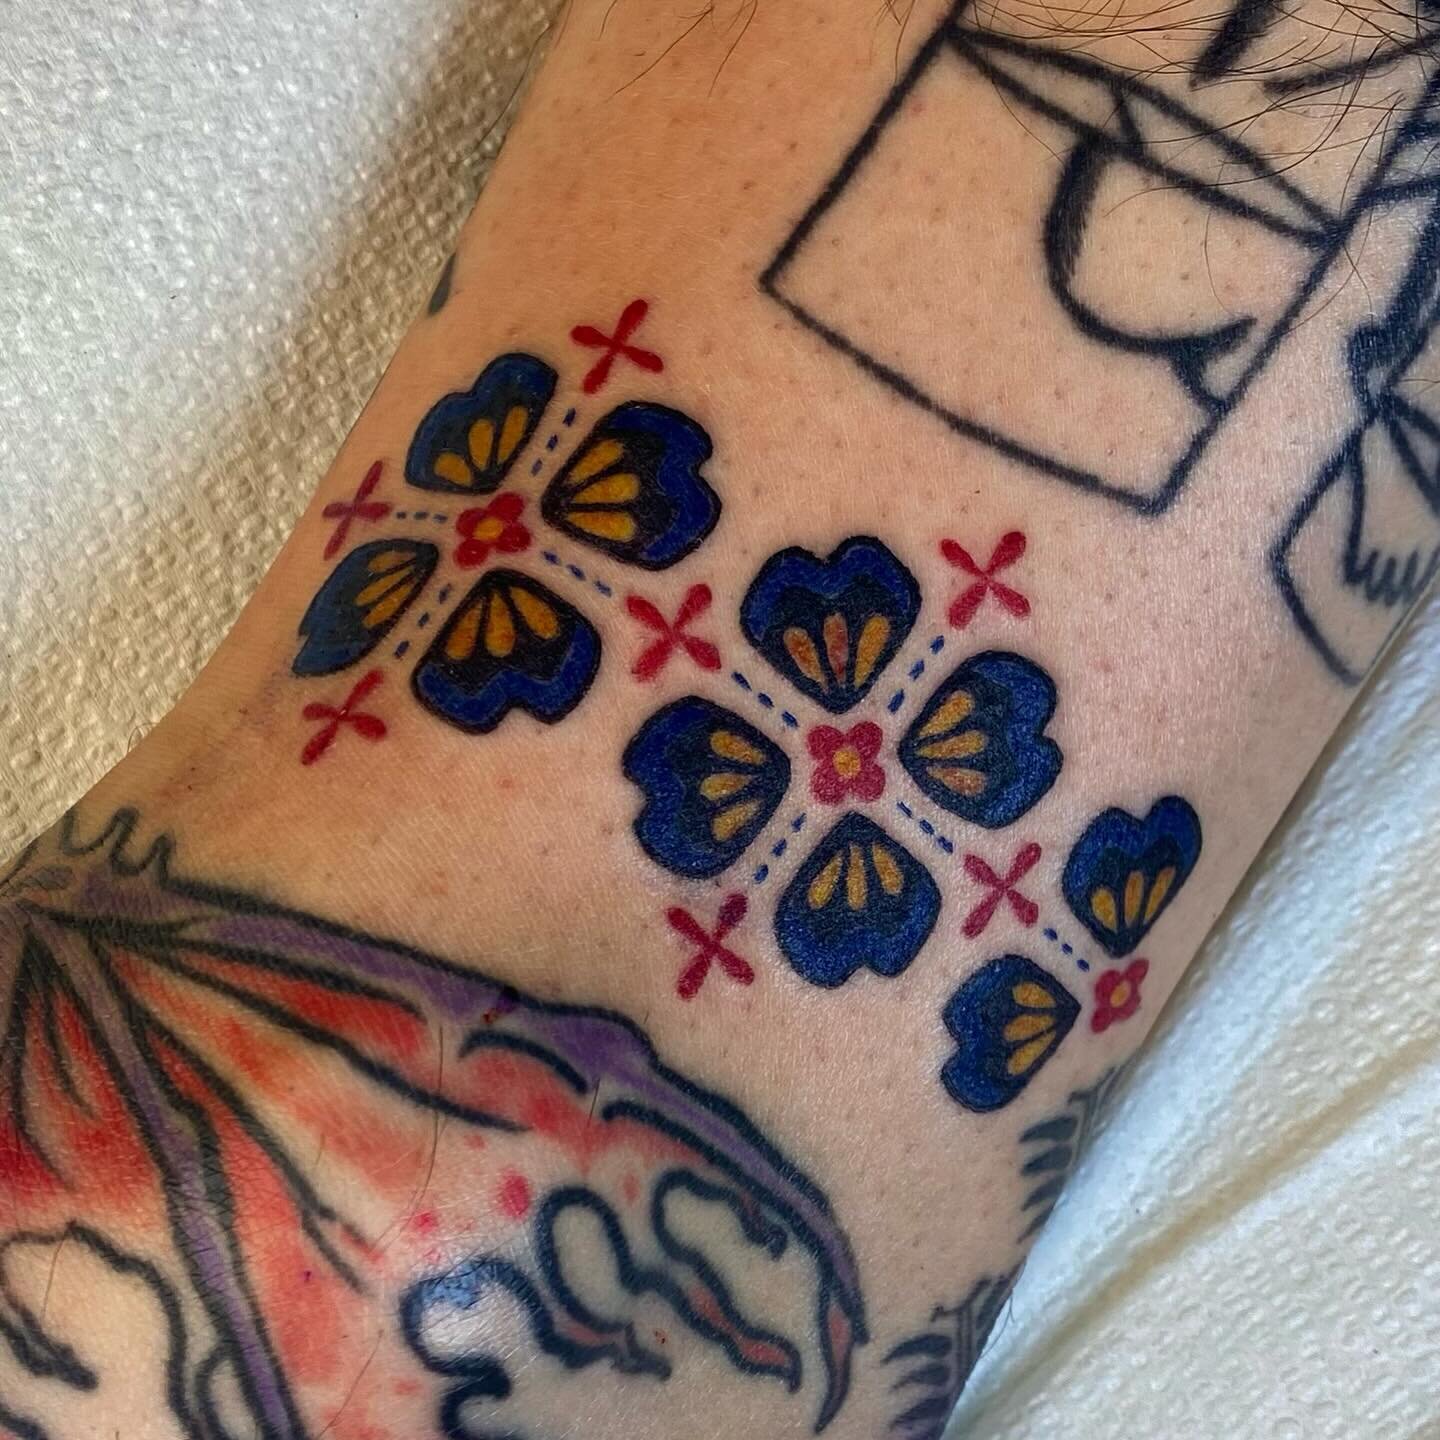 Ornamental gap filler based on Romanian embroidery patterns for @spooky_skeleton_wizard 🙇🏻💖

Books are open for flash &amp; custom hmu for cool tat tyyyyyy 😌✨
.
.
.
#vancouvertattoo #vancouvertattooartist  #vancouver #qttr #queertattooartist #con